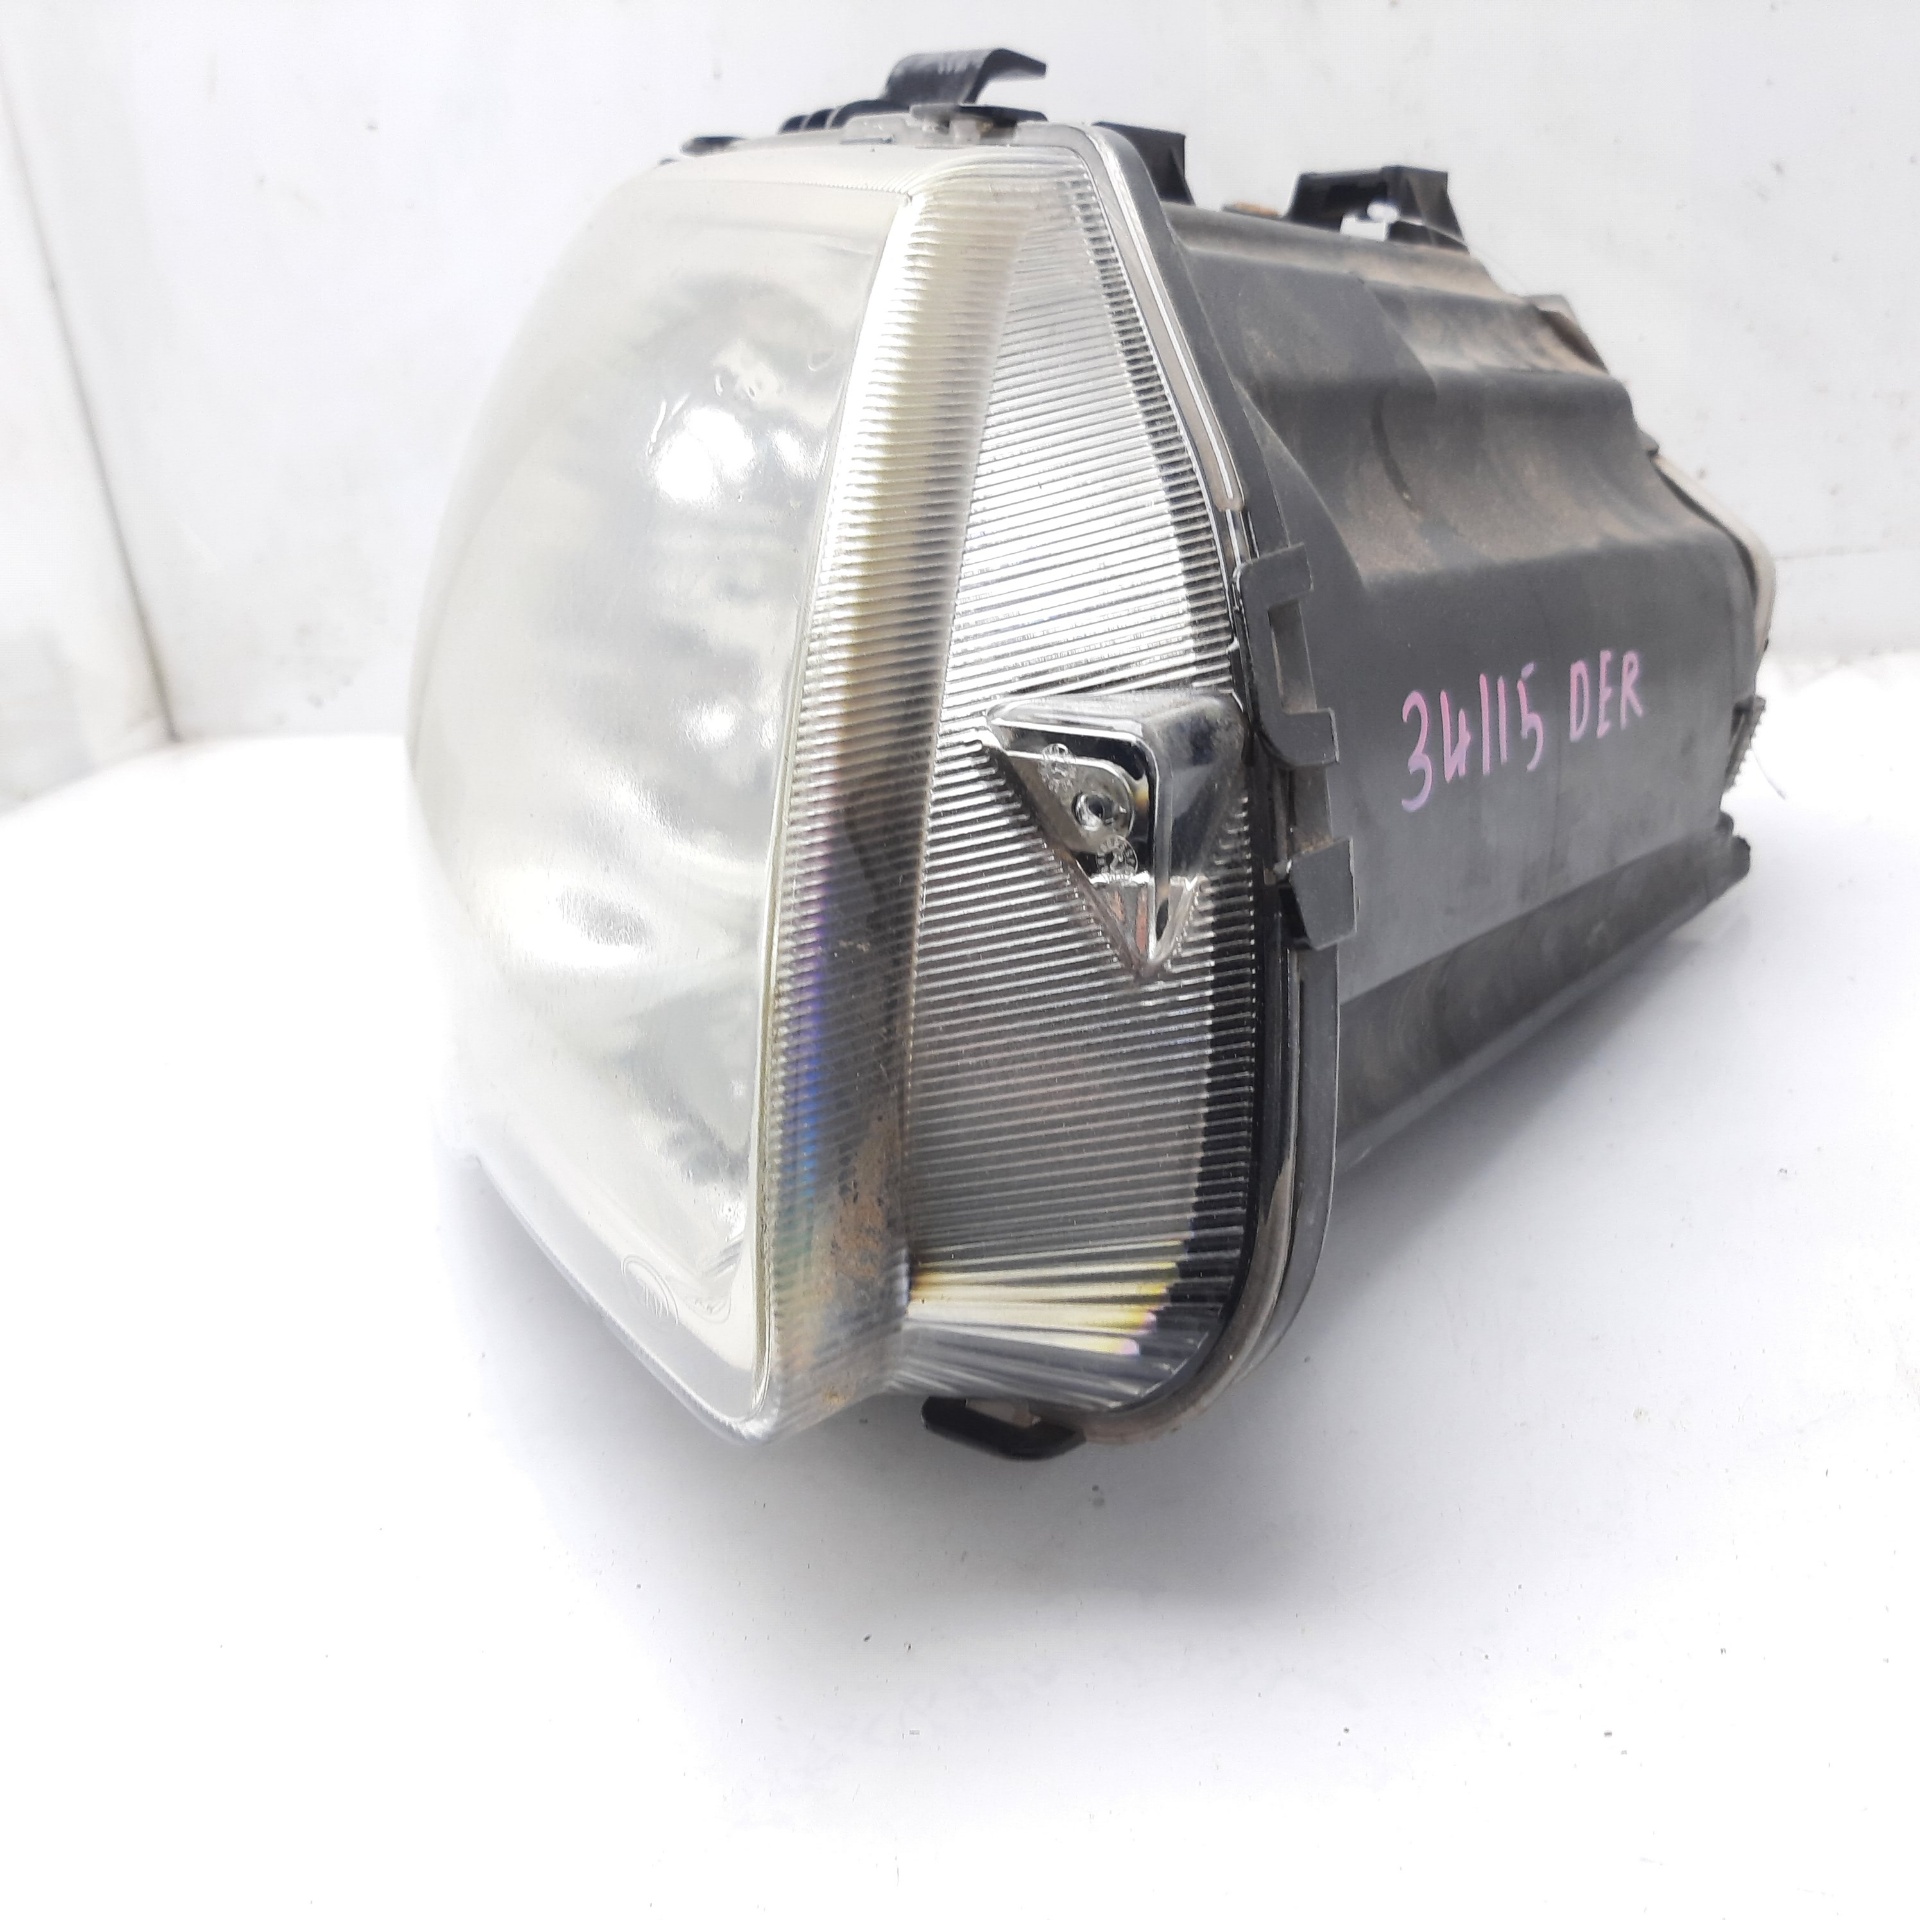 CHRYSLER Voyager 4 generation (2001-2007) Front Right Headlight 04857830AB 24947778